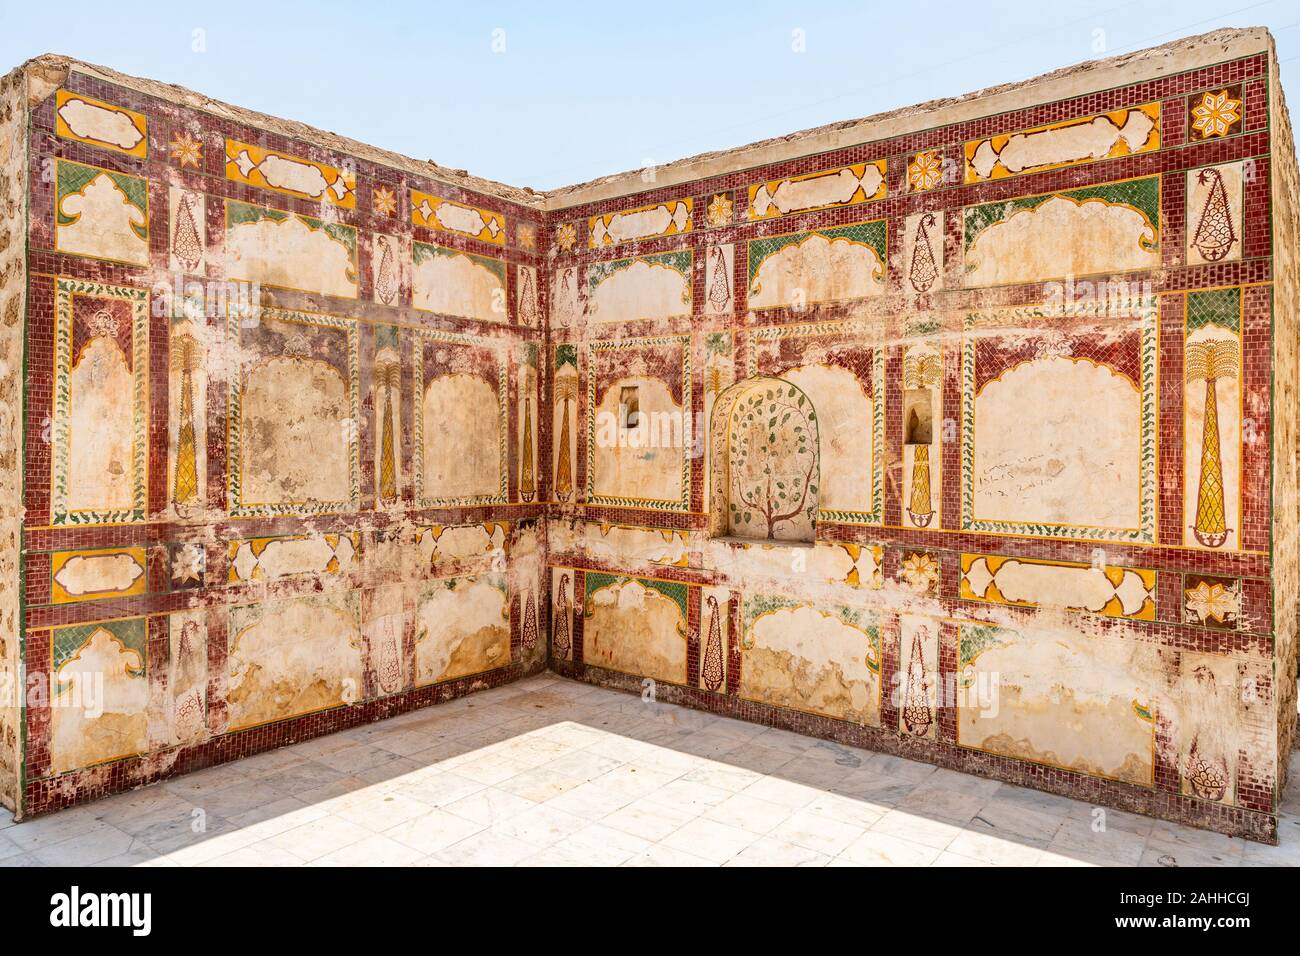 Chakwal Qila Katas Raj Hindu Temples Dedicated to Shiva Picturesque View of a Painted Wall on a Sunny Blue Sky Day Stock Photo